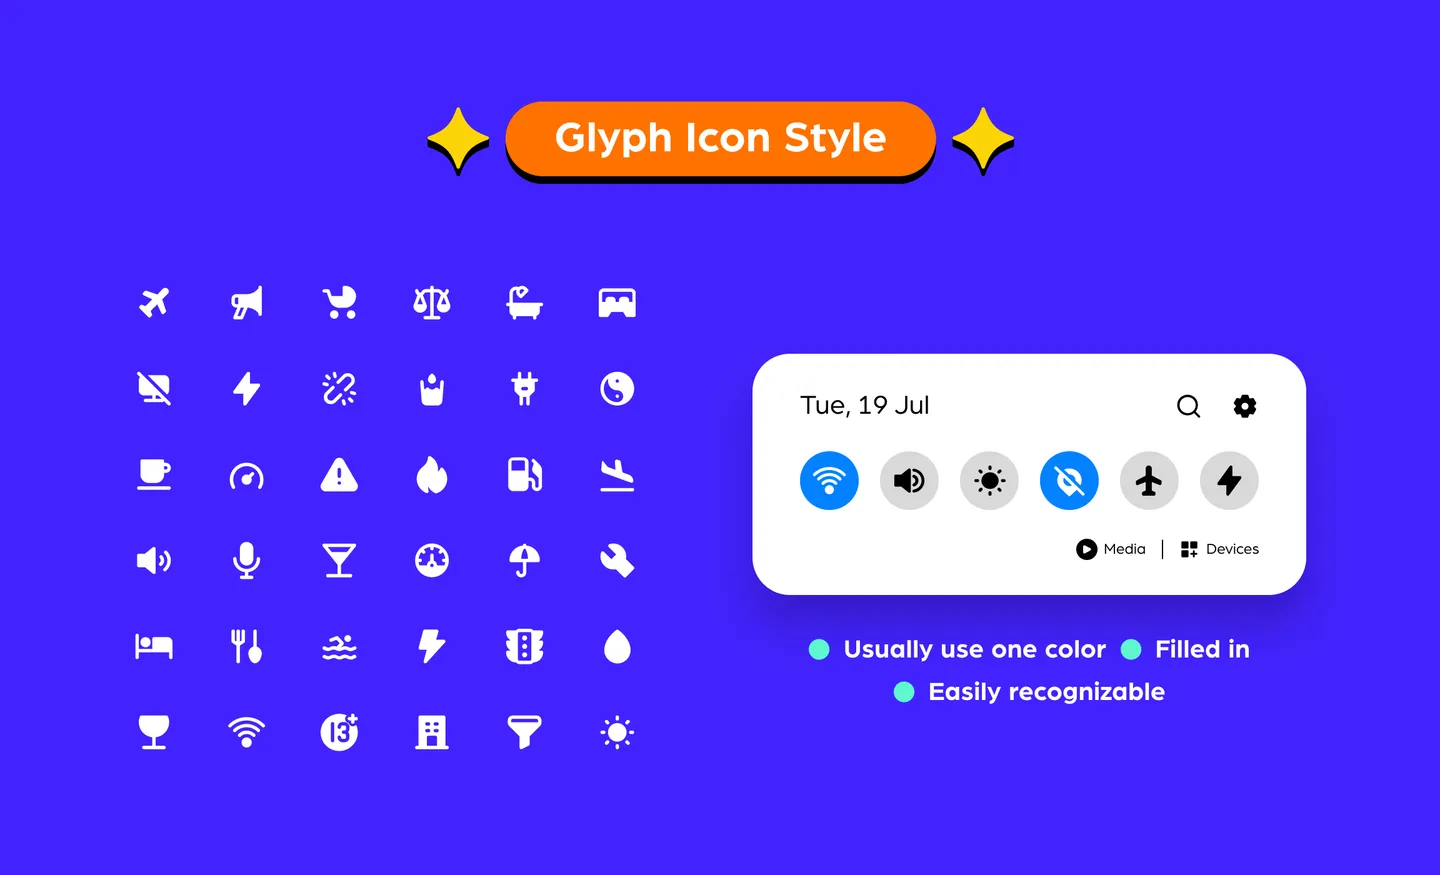 A guide to the glyph icon style